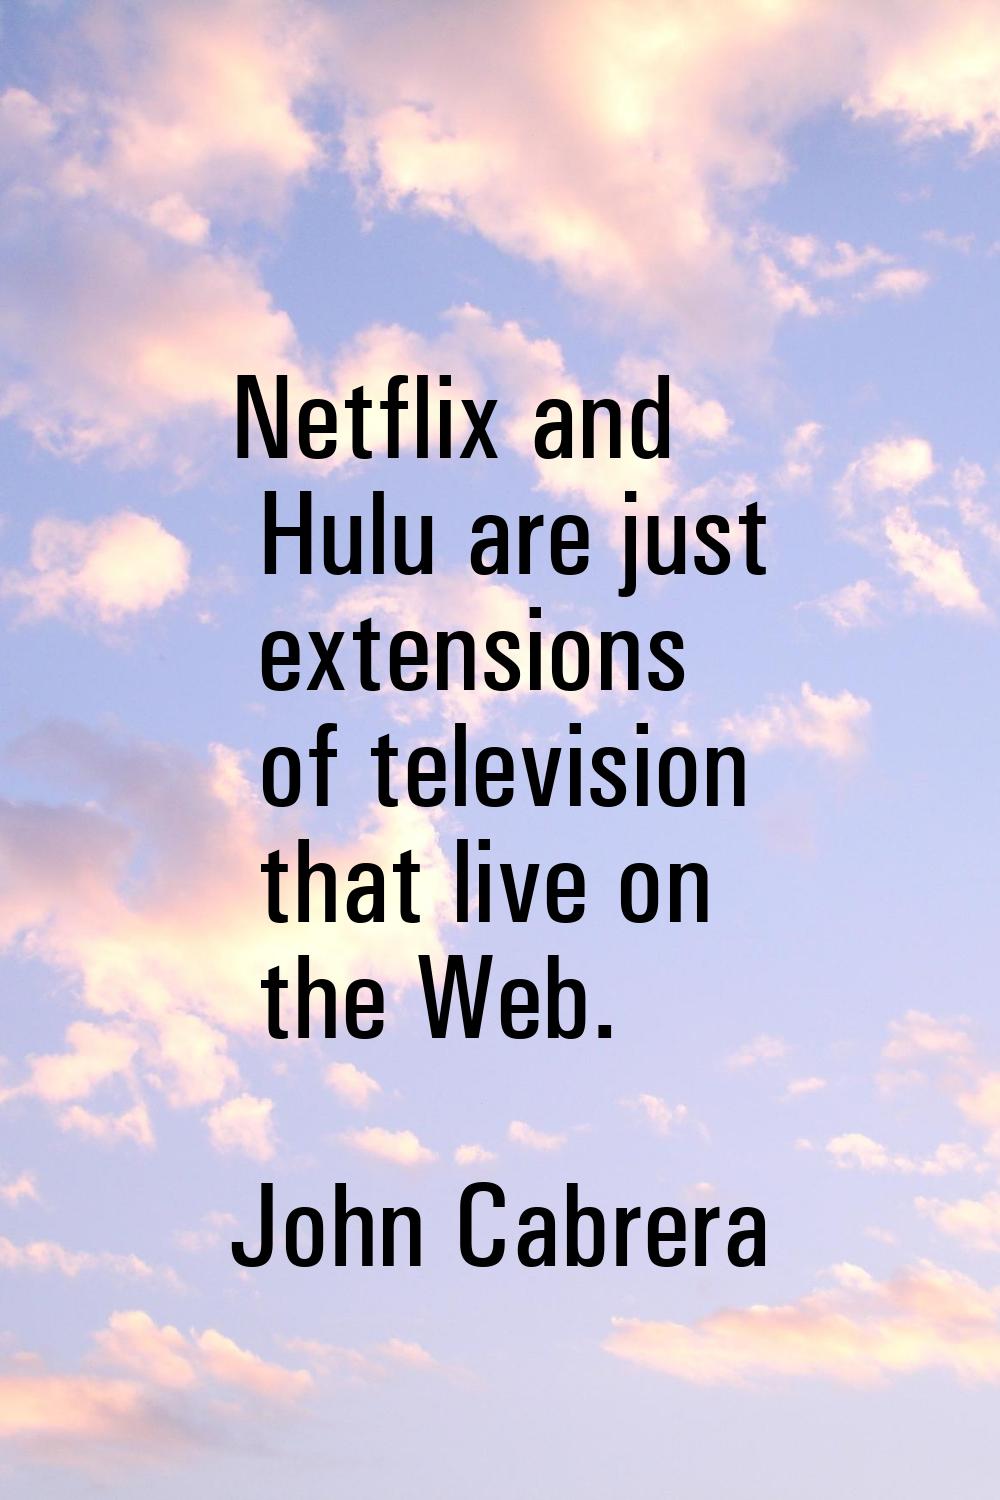 Netflix and Hulu are just extensions of television that live on the Web.